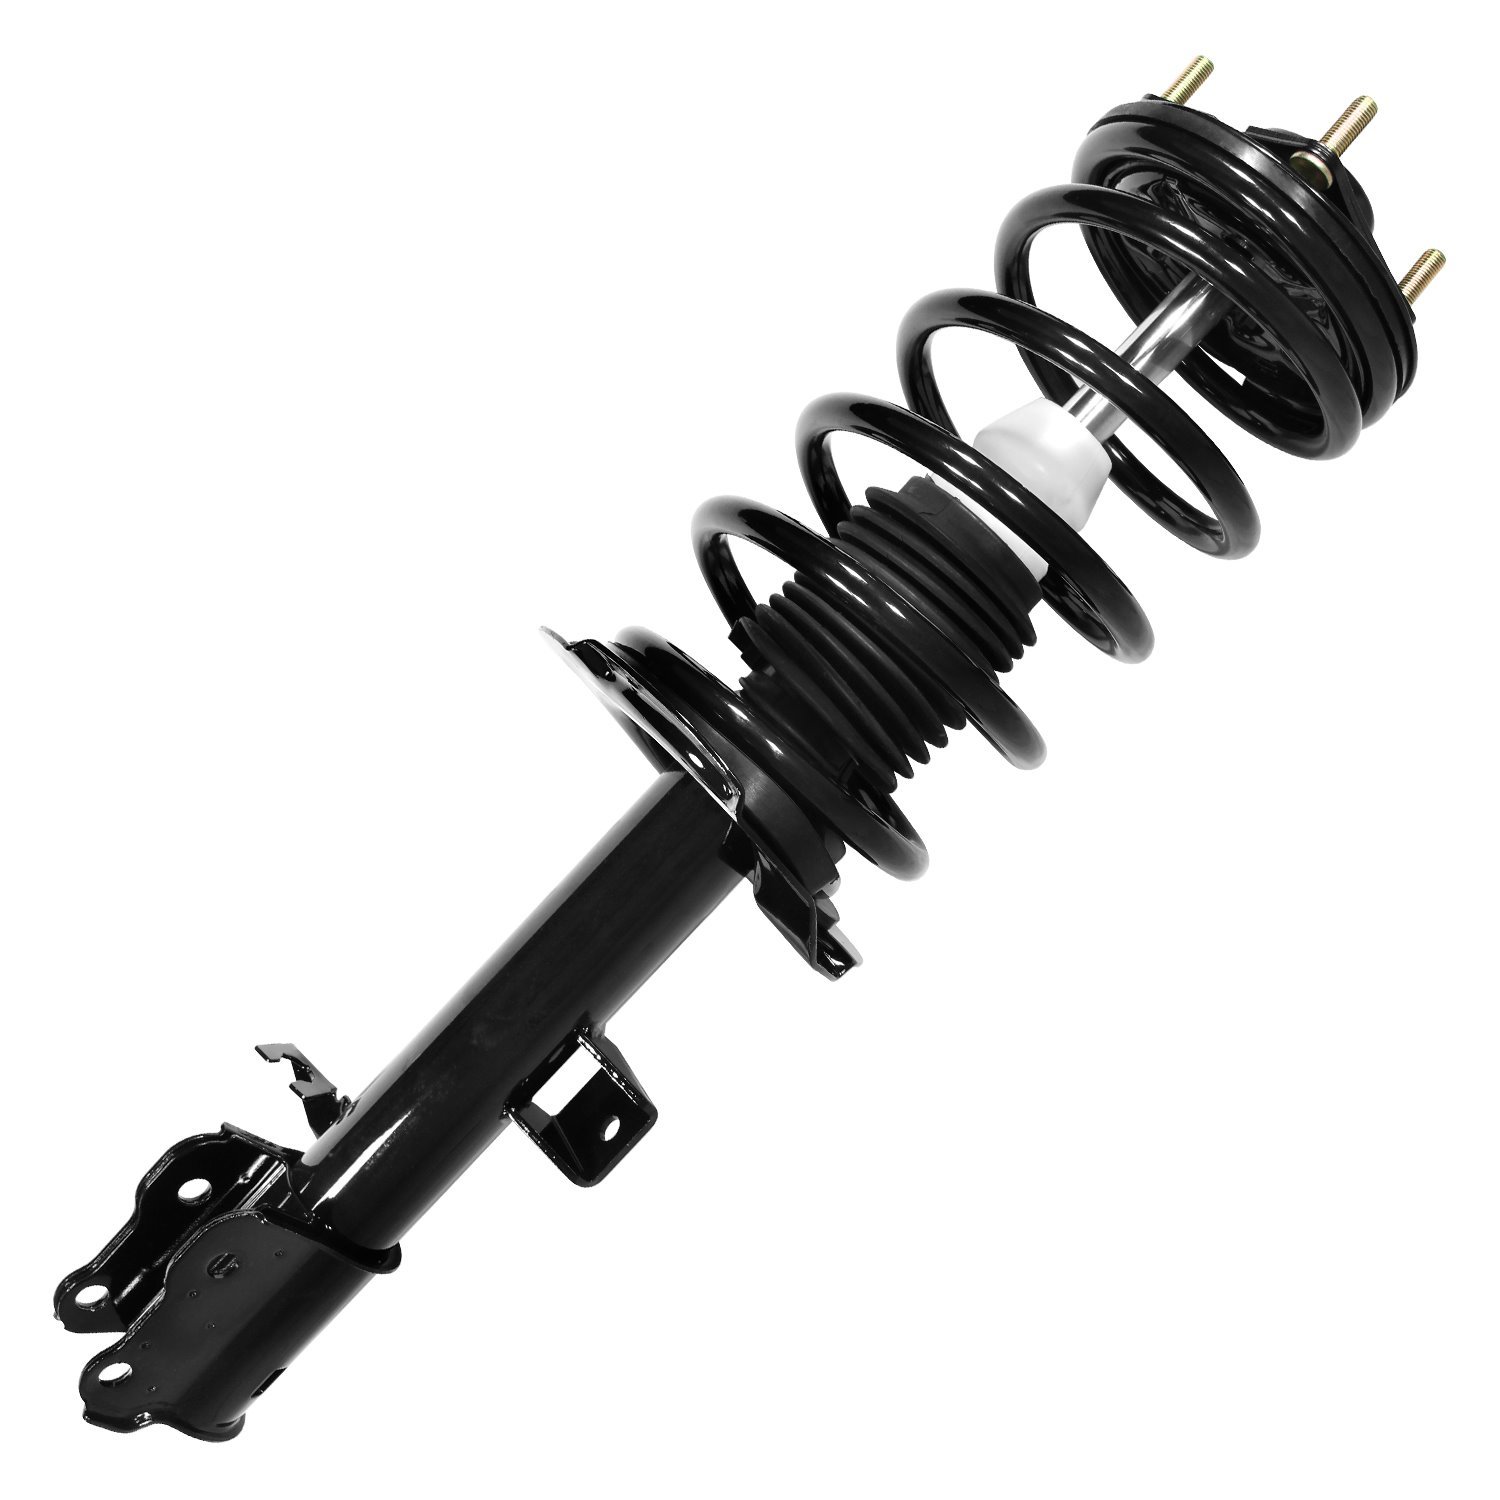 11621 Suspension Strut & Coil Spring Assembly Fits Select Ford Escape, Mercury Mariner, Mazda Tribute